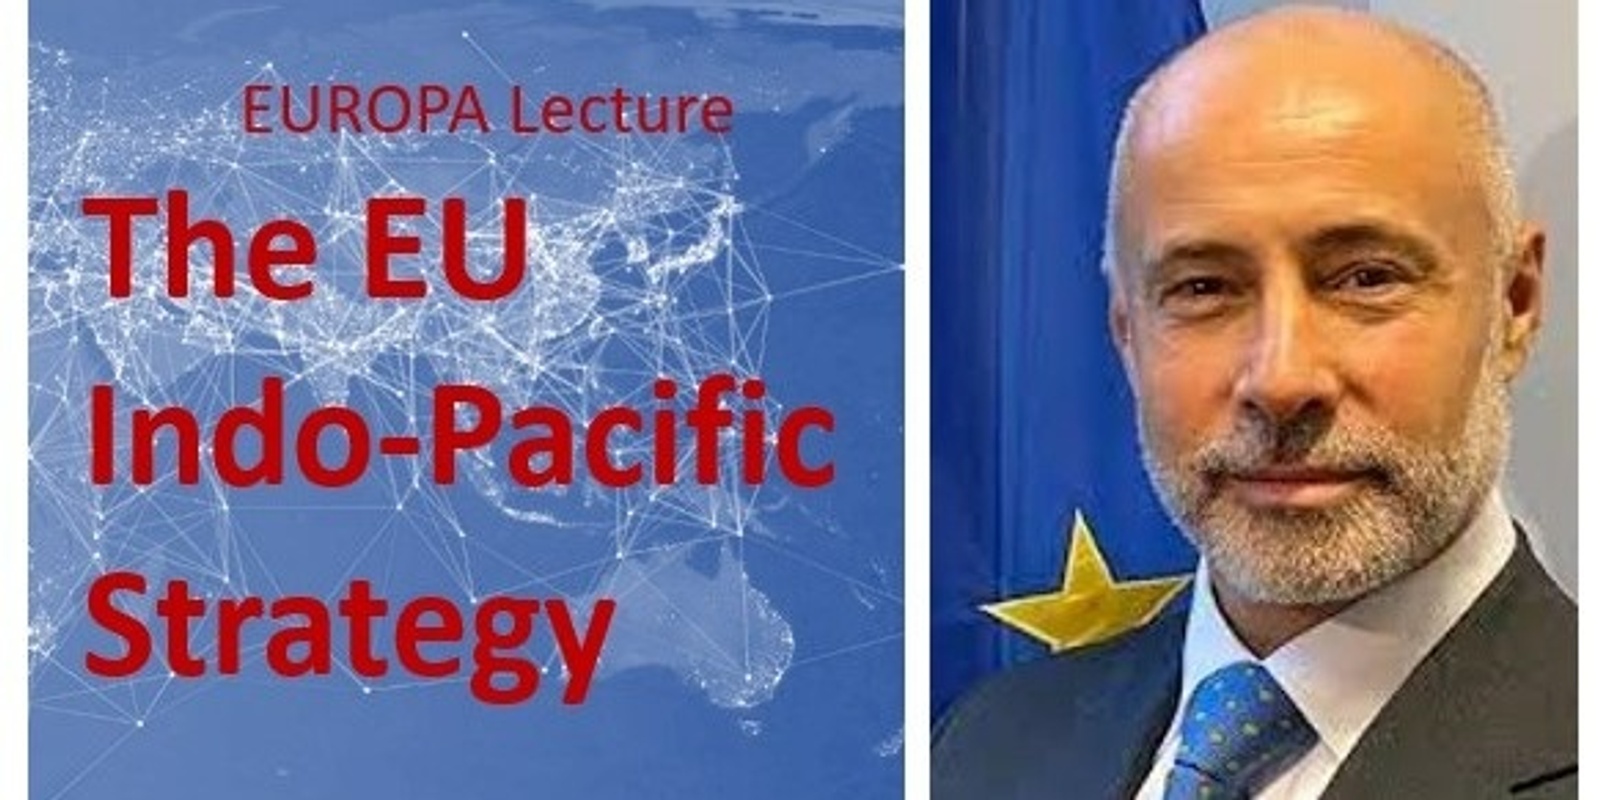 EUROPA Lecture